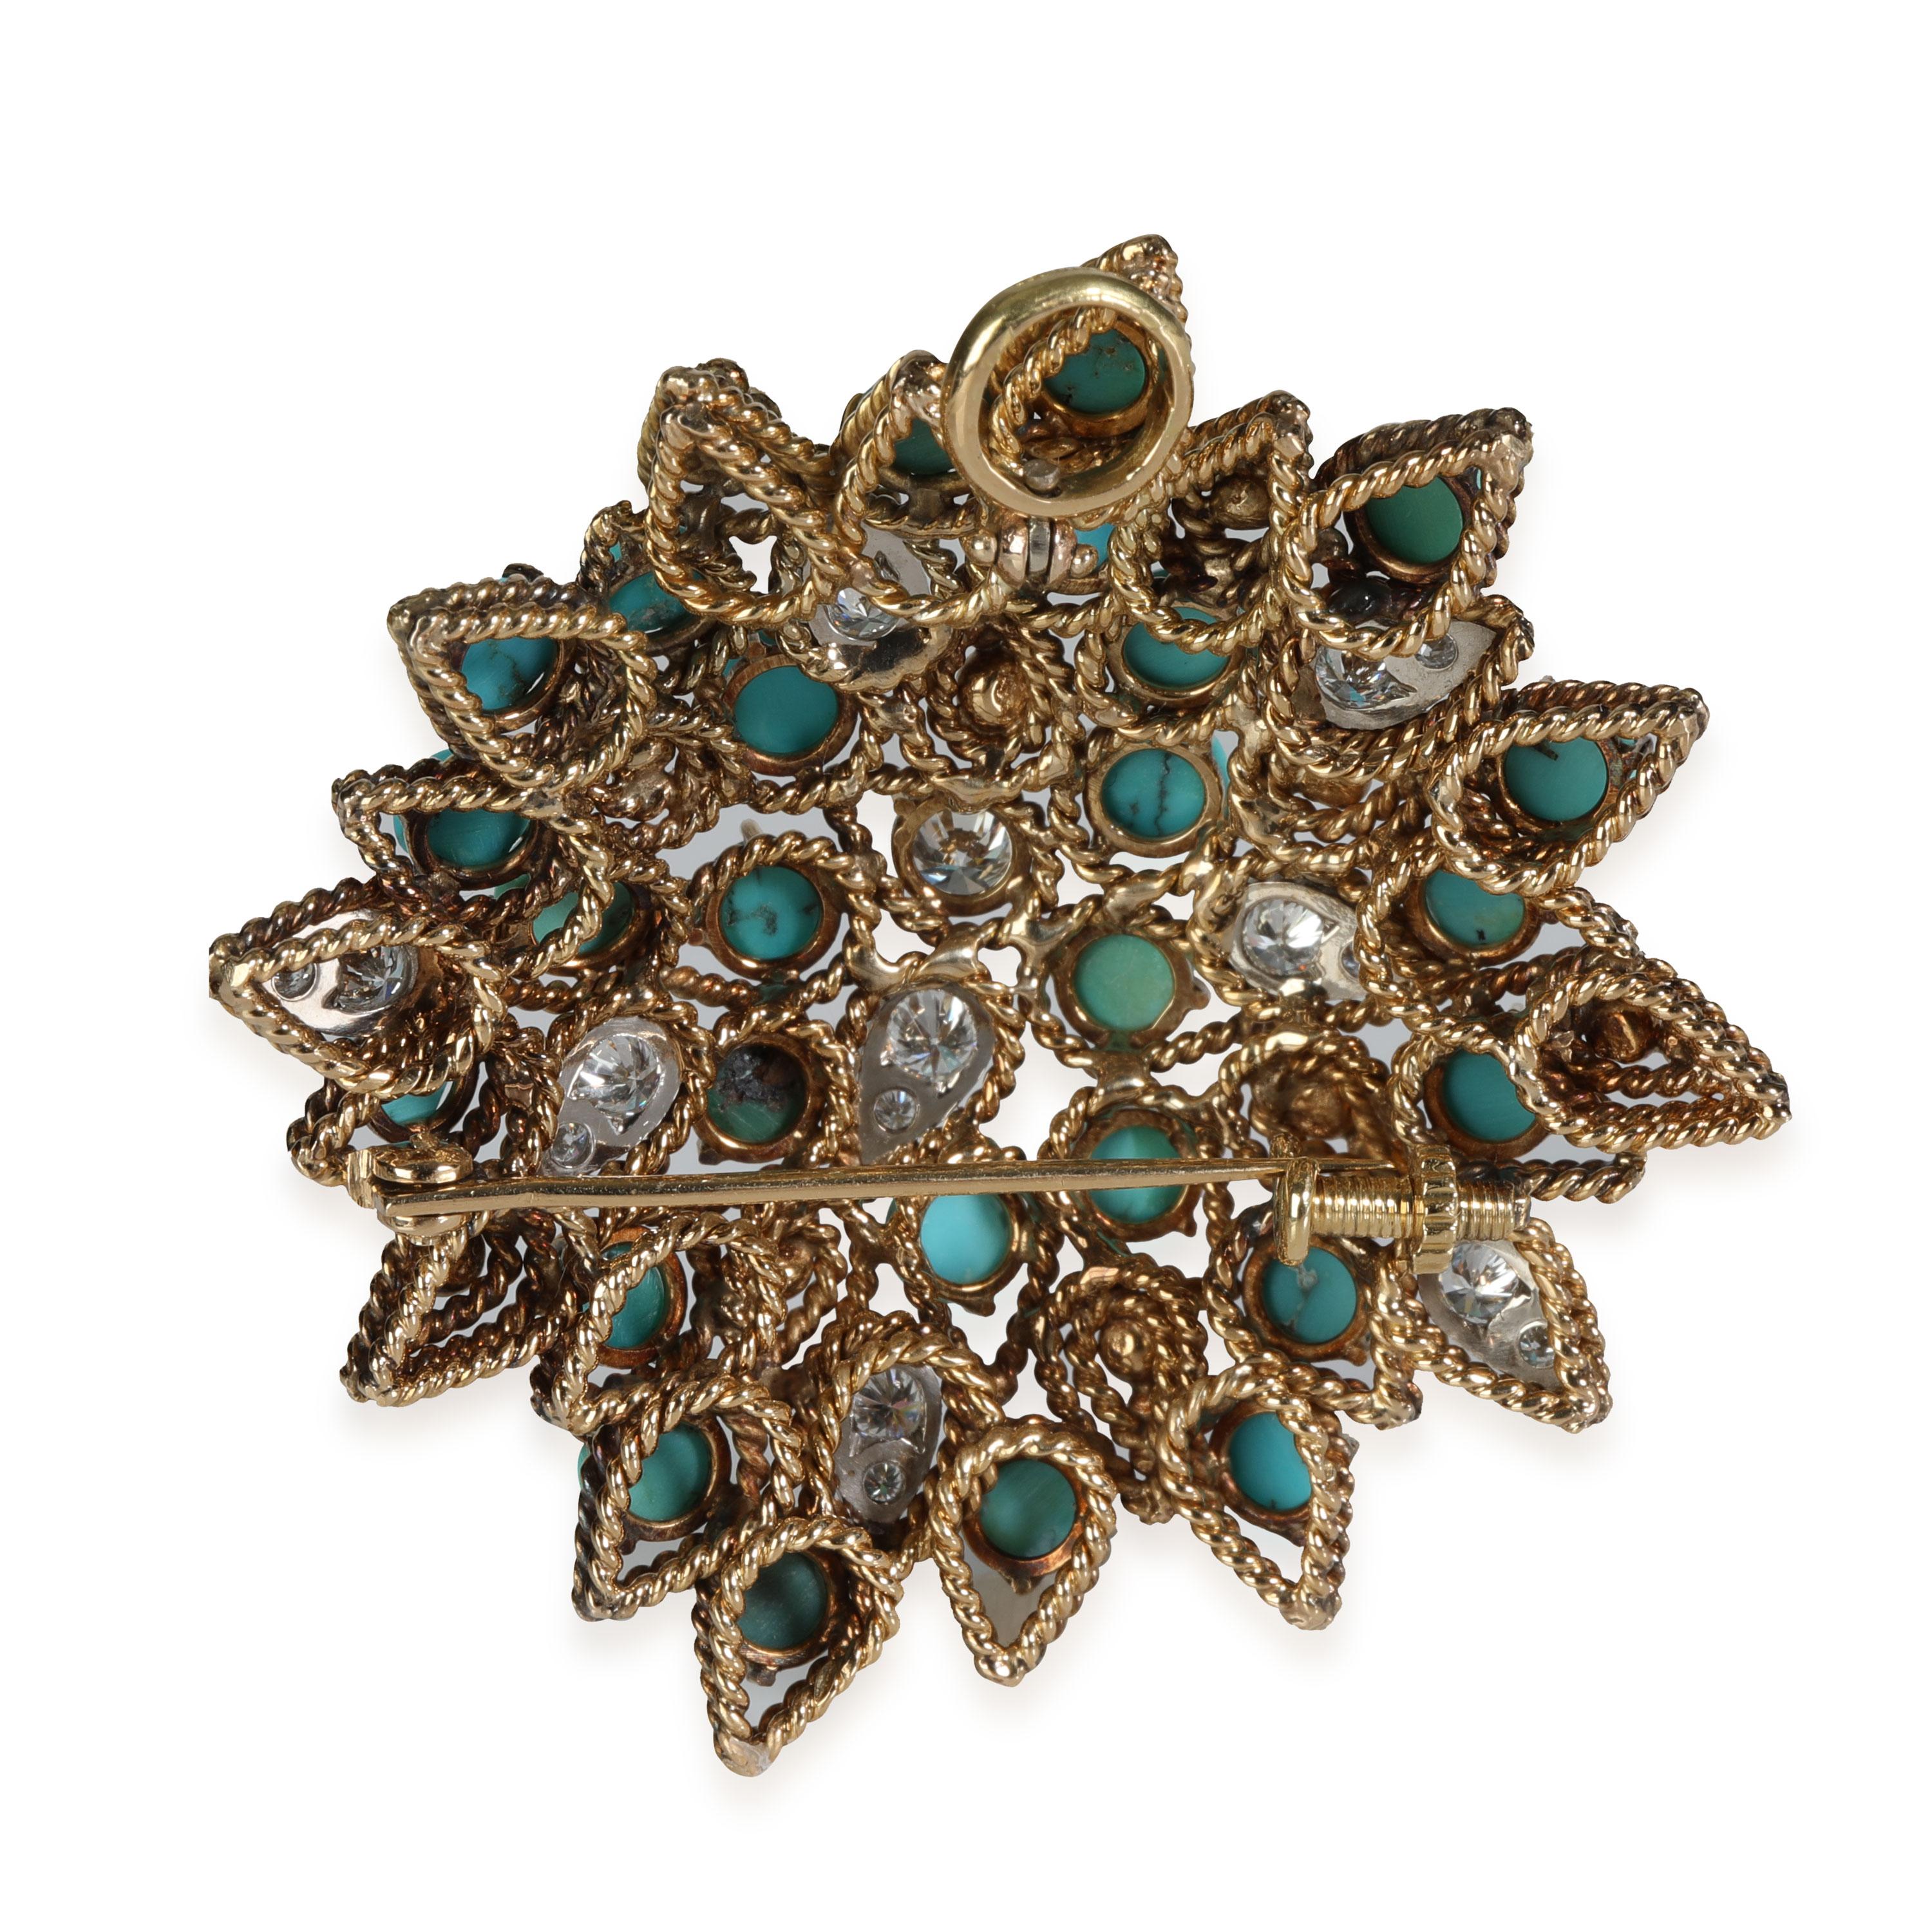 Turquoise Diamond Brooch in 14-16K Yellow Gold 2.33 CTW

PRIMARY DETAILS
SKU: 116222
Listing Title: Turquoise Diamond Brooch in 14-16K Yellow Gold 2.33 CTW
Condition Description: Retails for 4000 USD. Length is 2 inches.
Metal Type: Yellow